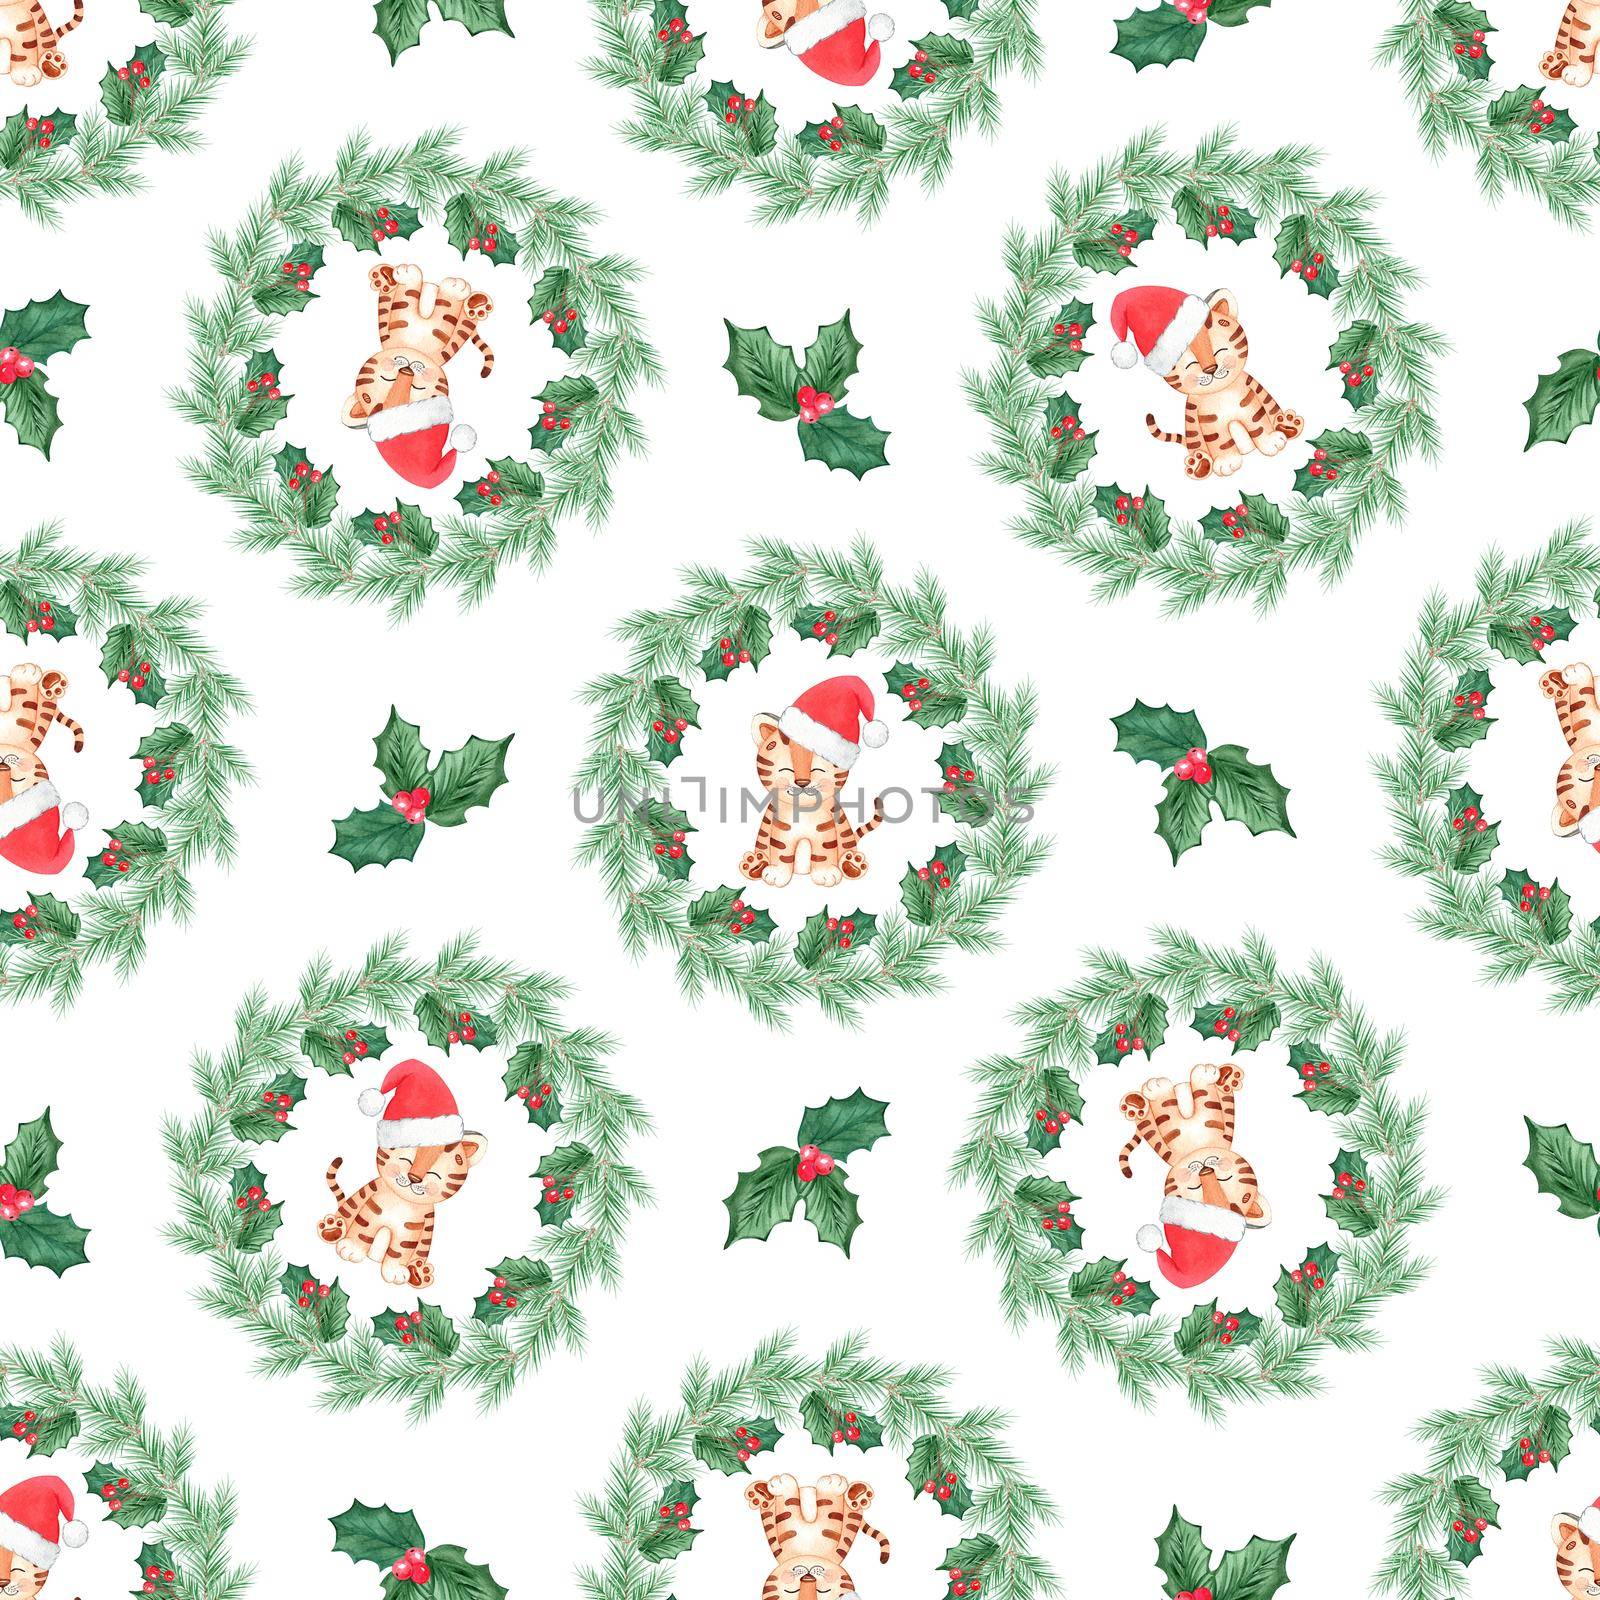 Watercolor christmas tiger in fir wreath seamless pattern on white background. Holiday winter print for fabric, wallpaper, wrapping